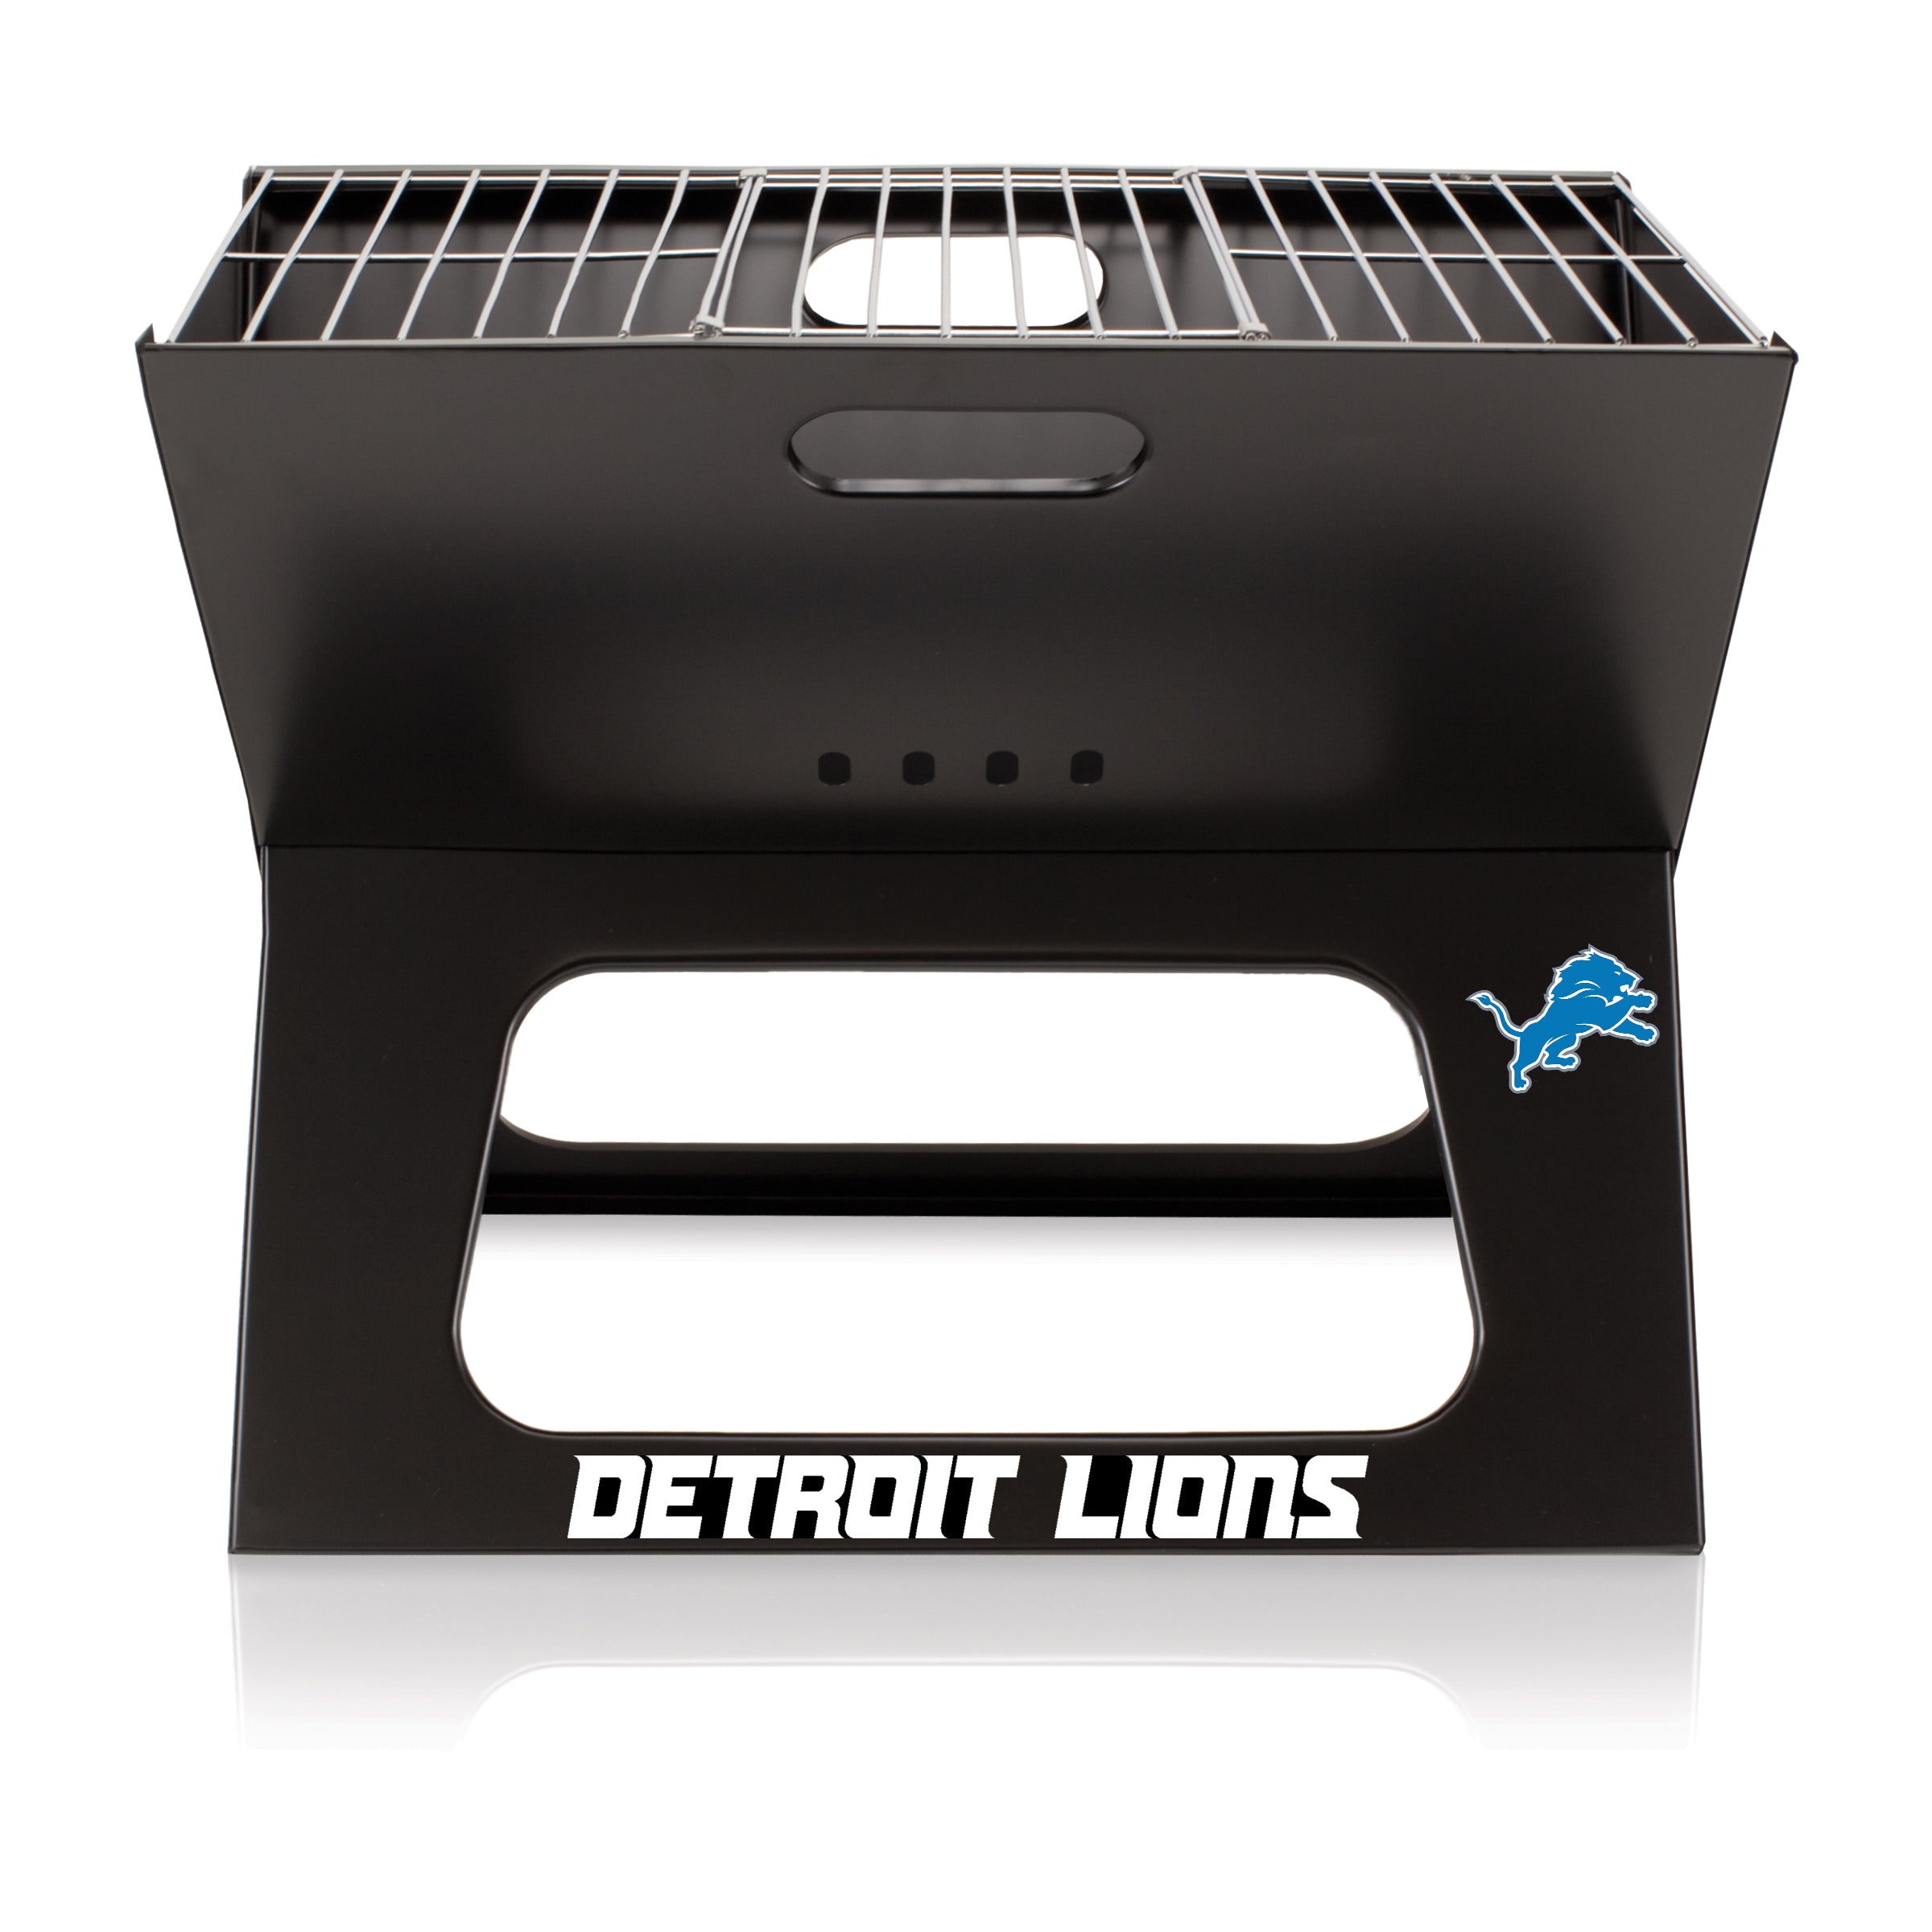 Detroit Lions - X-Grill Portable Charcoal BBQ Grill